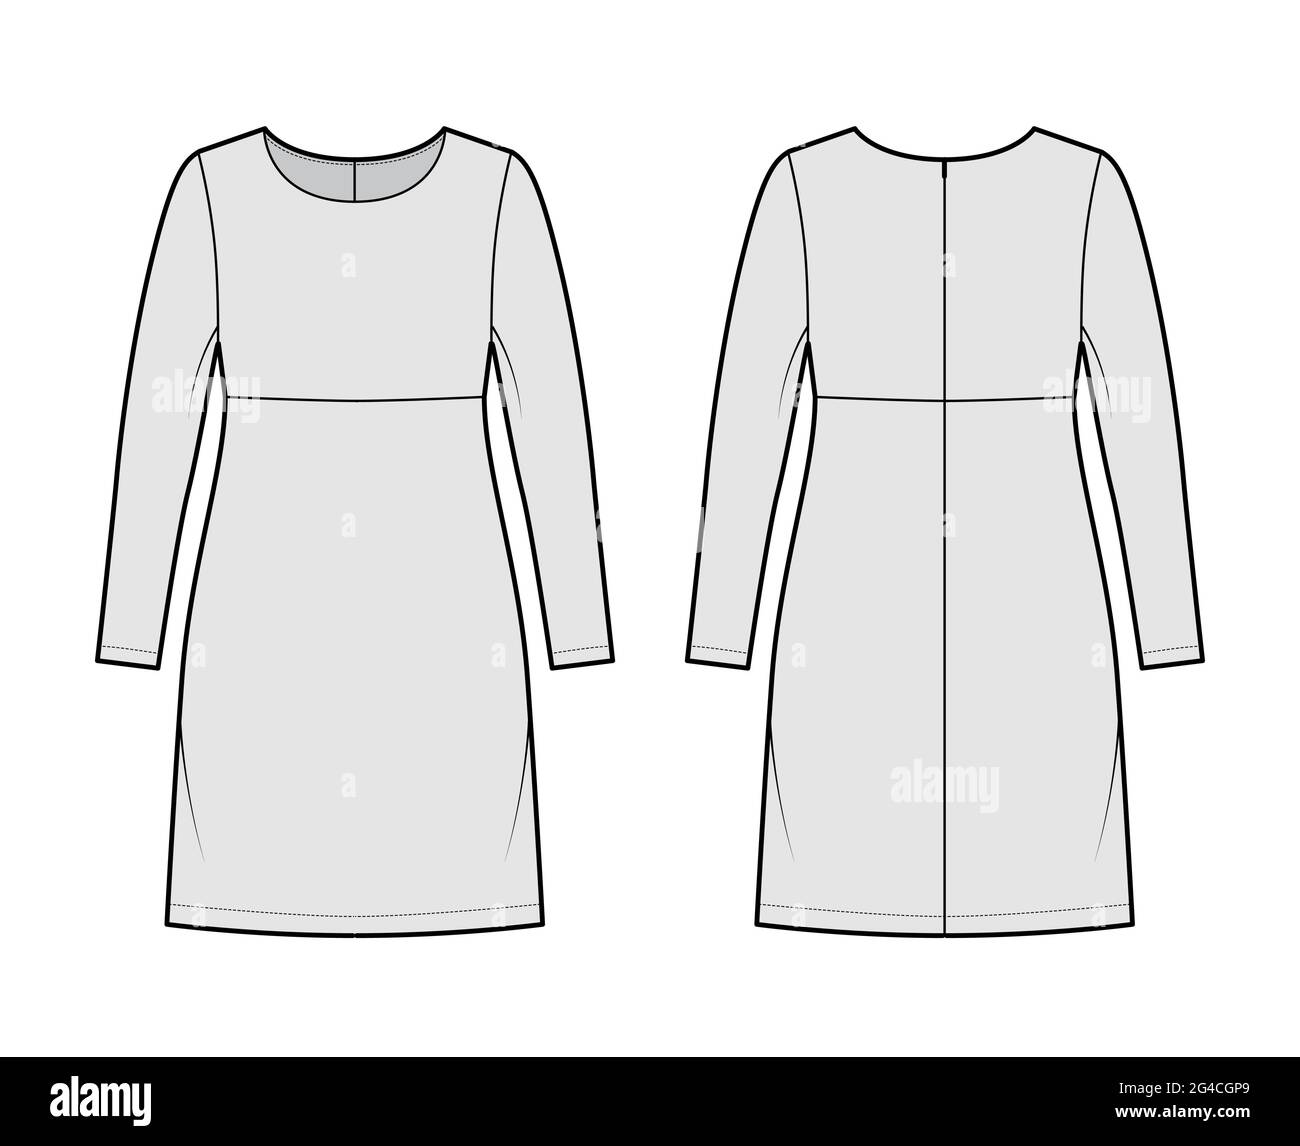 Dress empire line technical fashion illustration with long sleeves ...